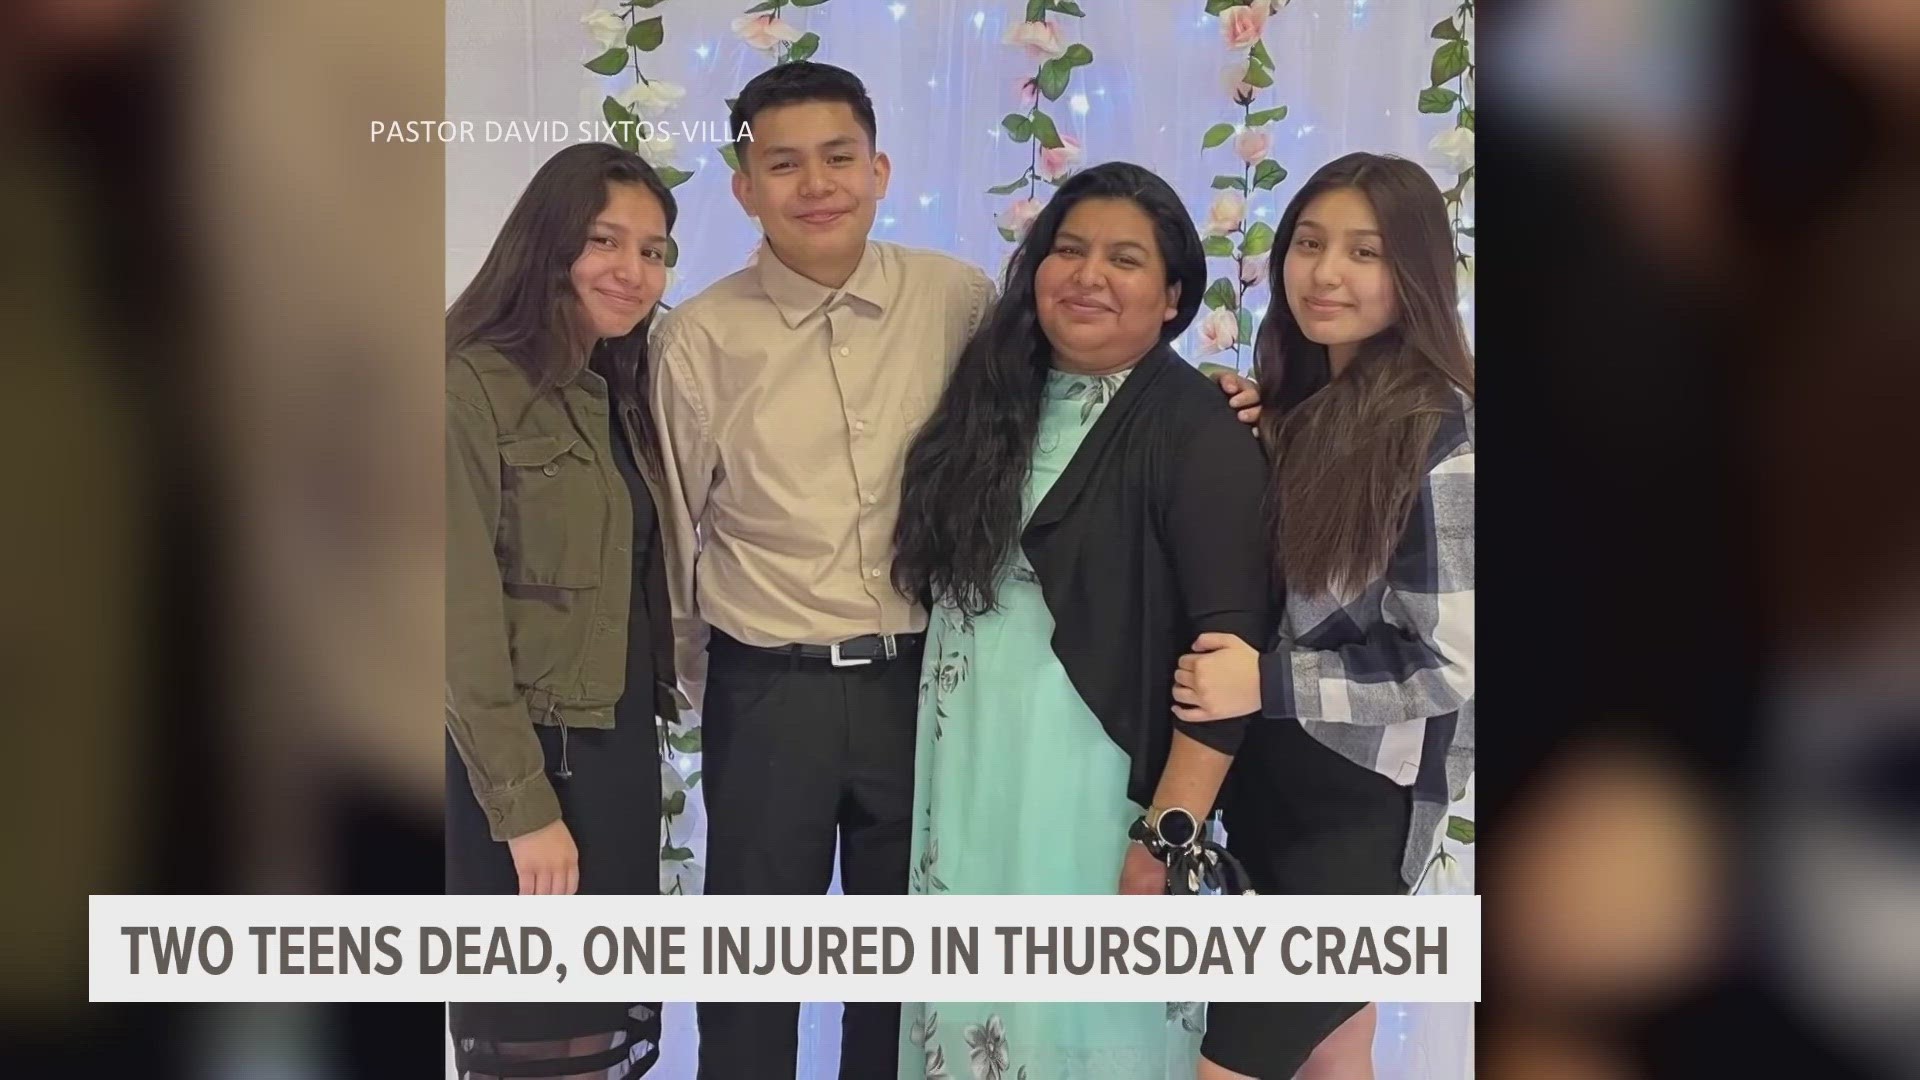 Daisy and Walter Fuentes Gavidia died Thursday morning, with their sister Edlyn surviving with serious injuries.